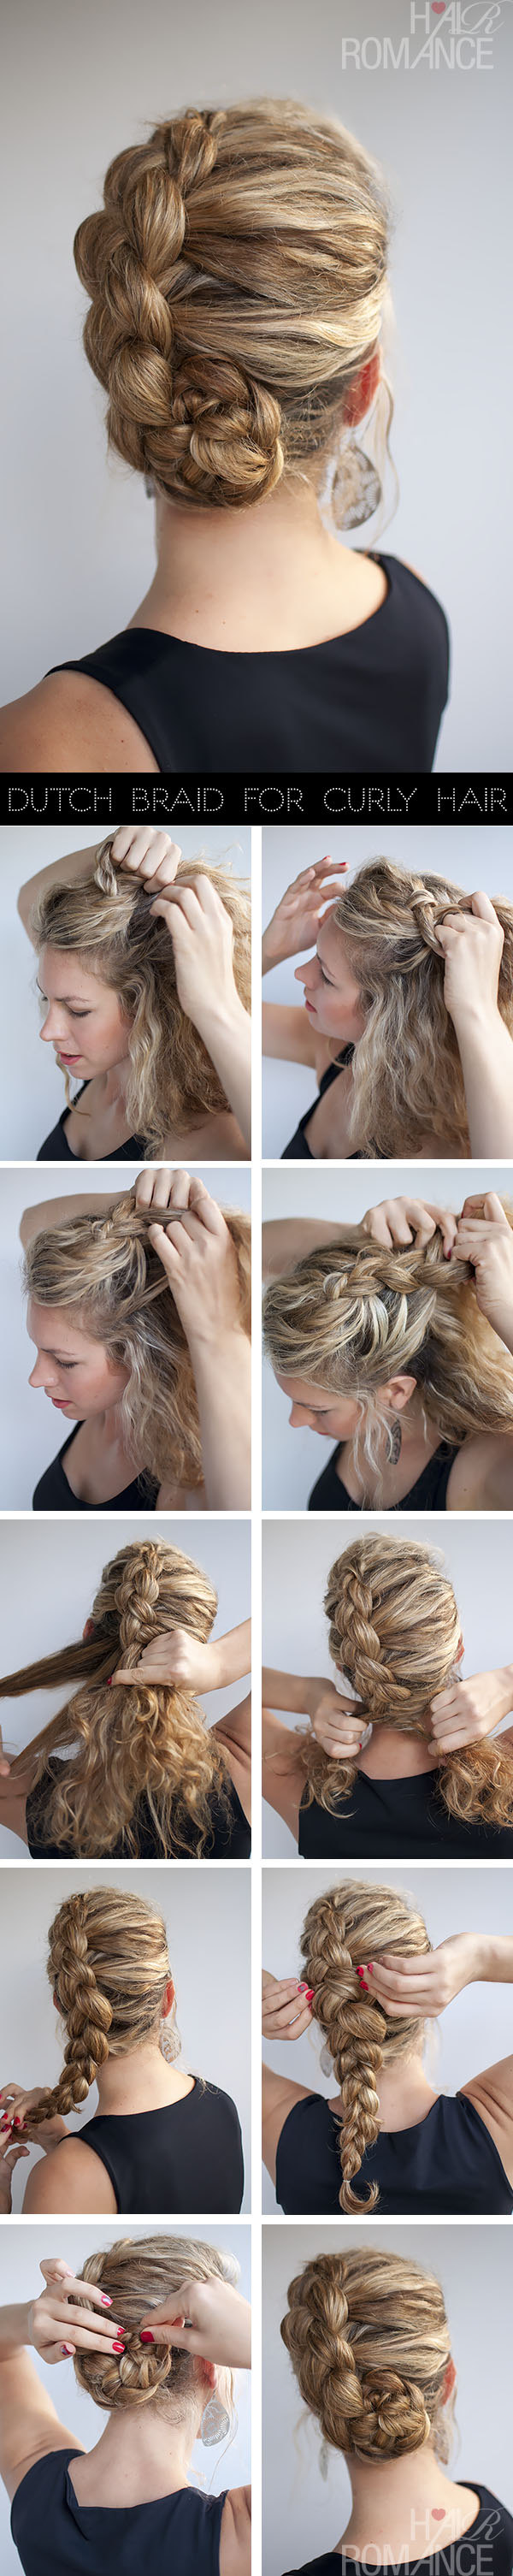 Hairstyles For Long Hair Braids Steps